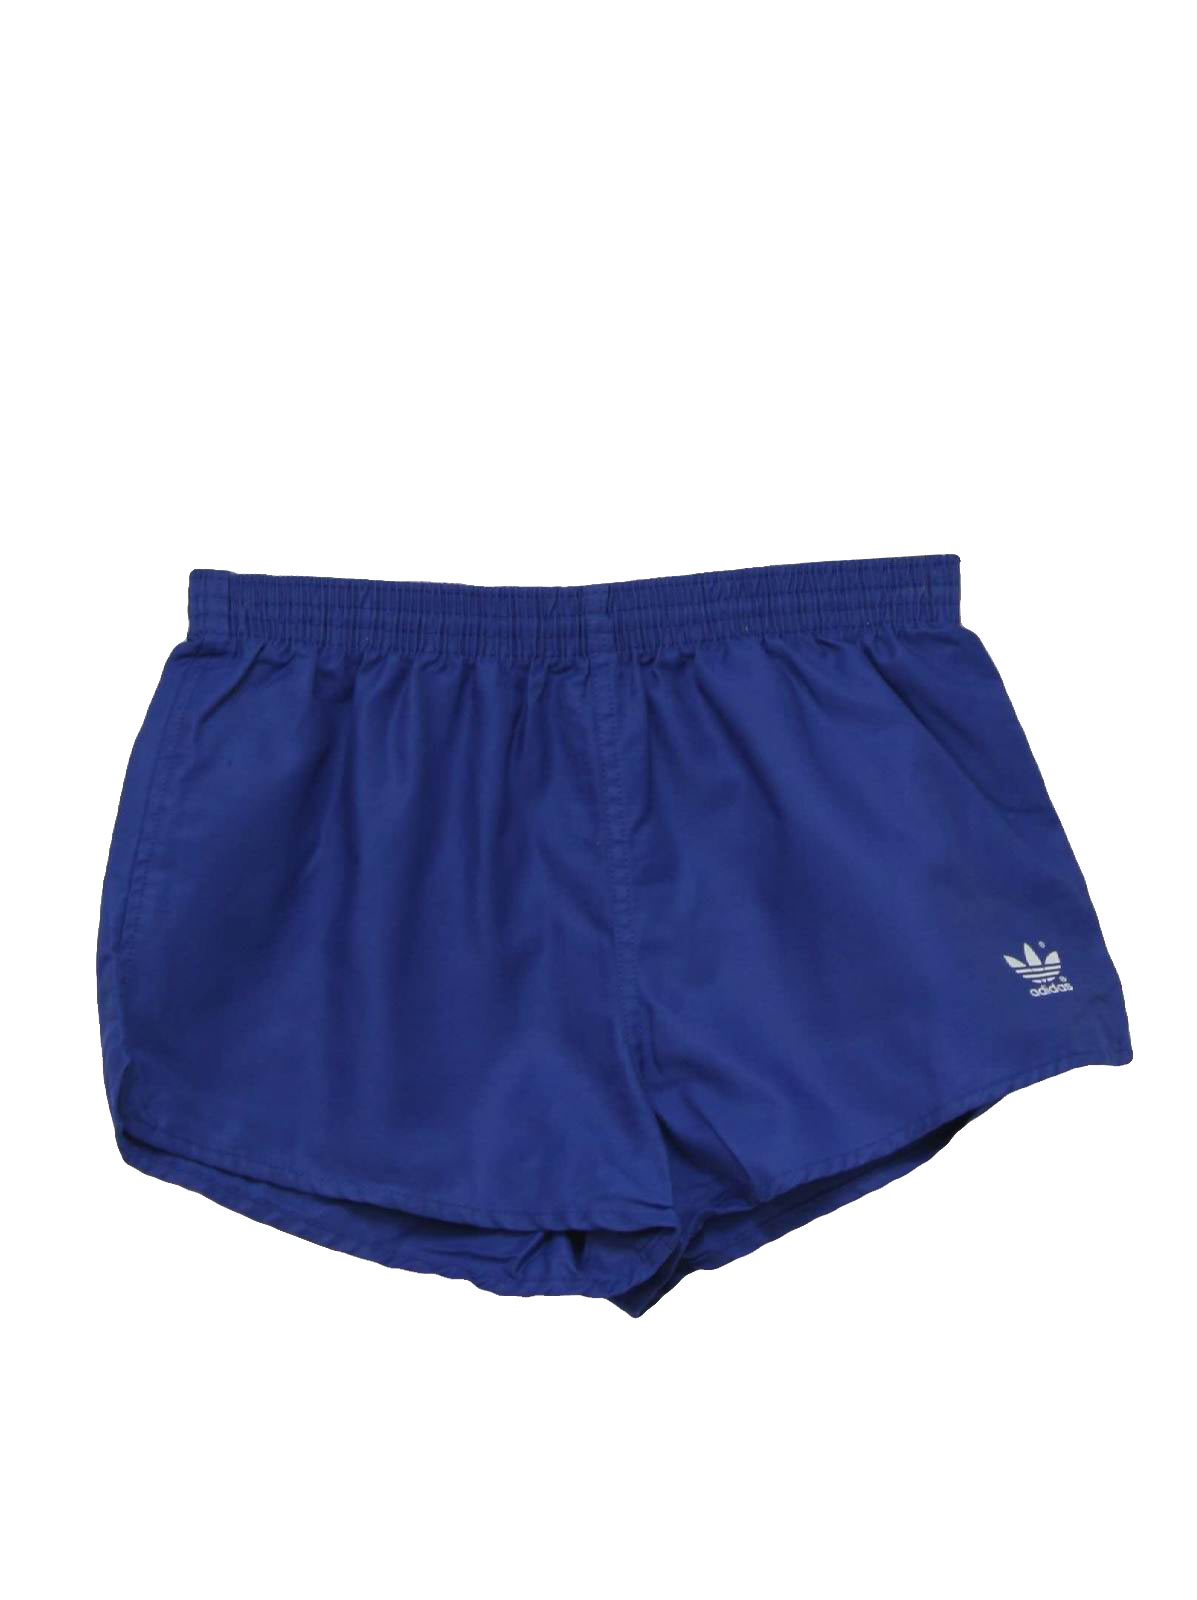 1980's Shorts (Adidas): 80s -Adidas- Mens blue background polyester and ...